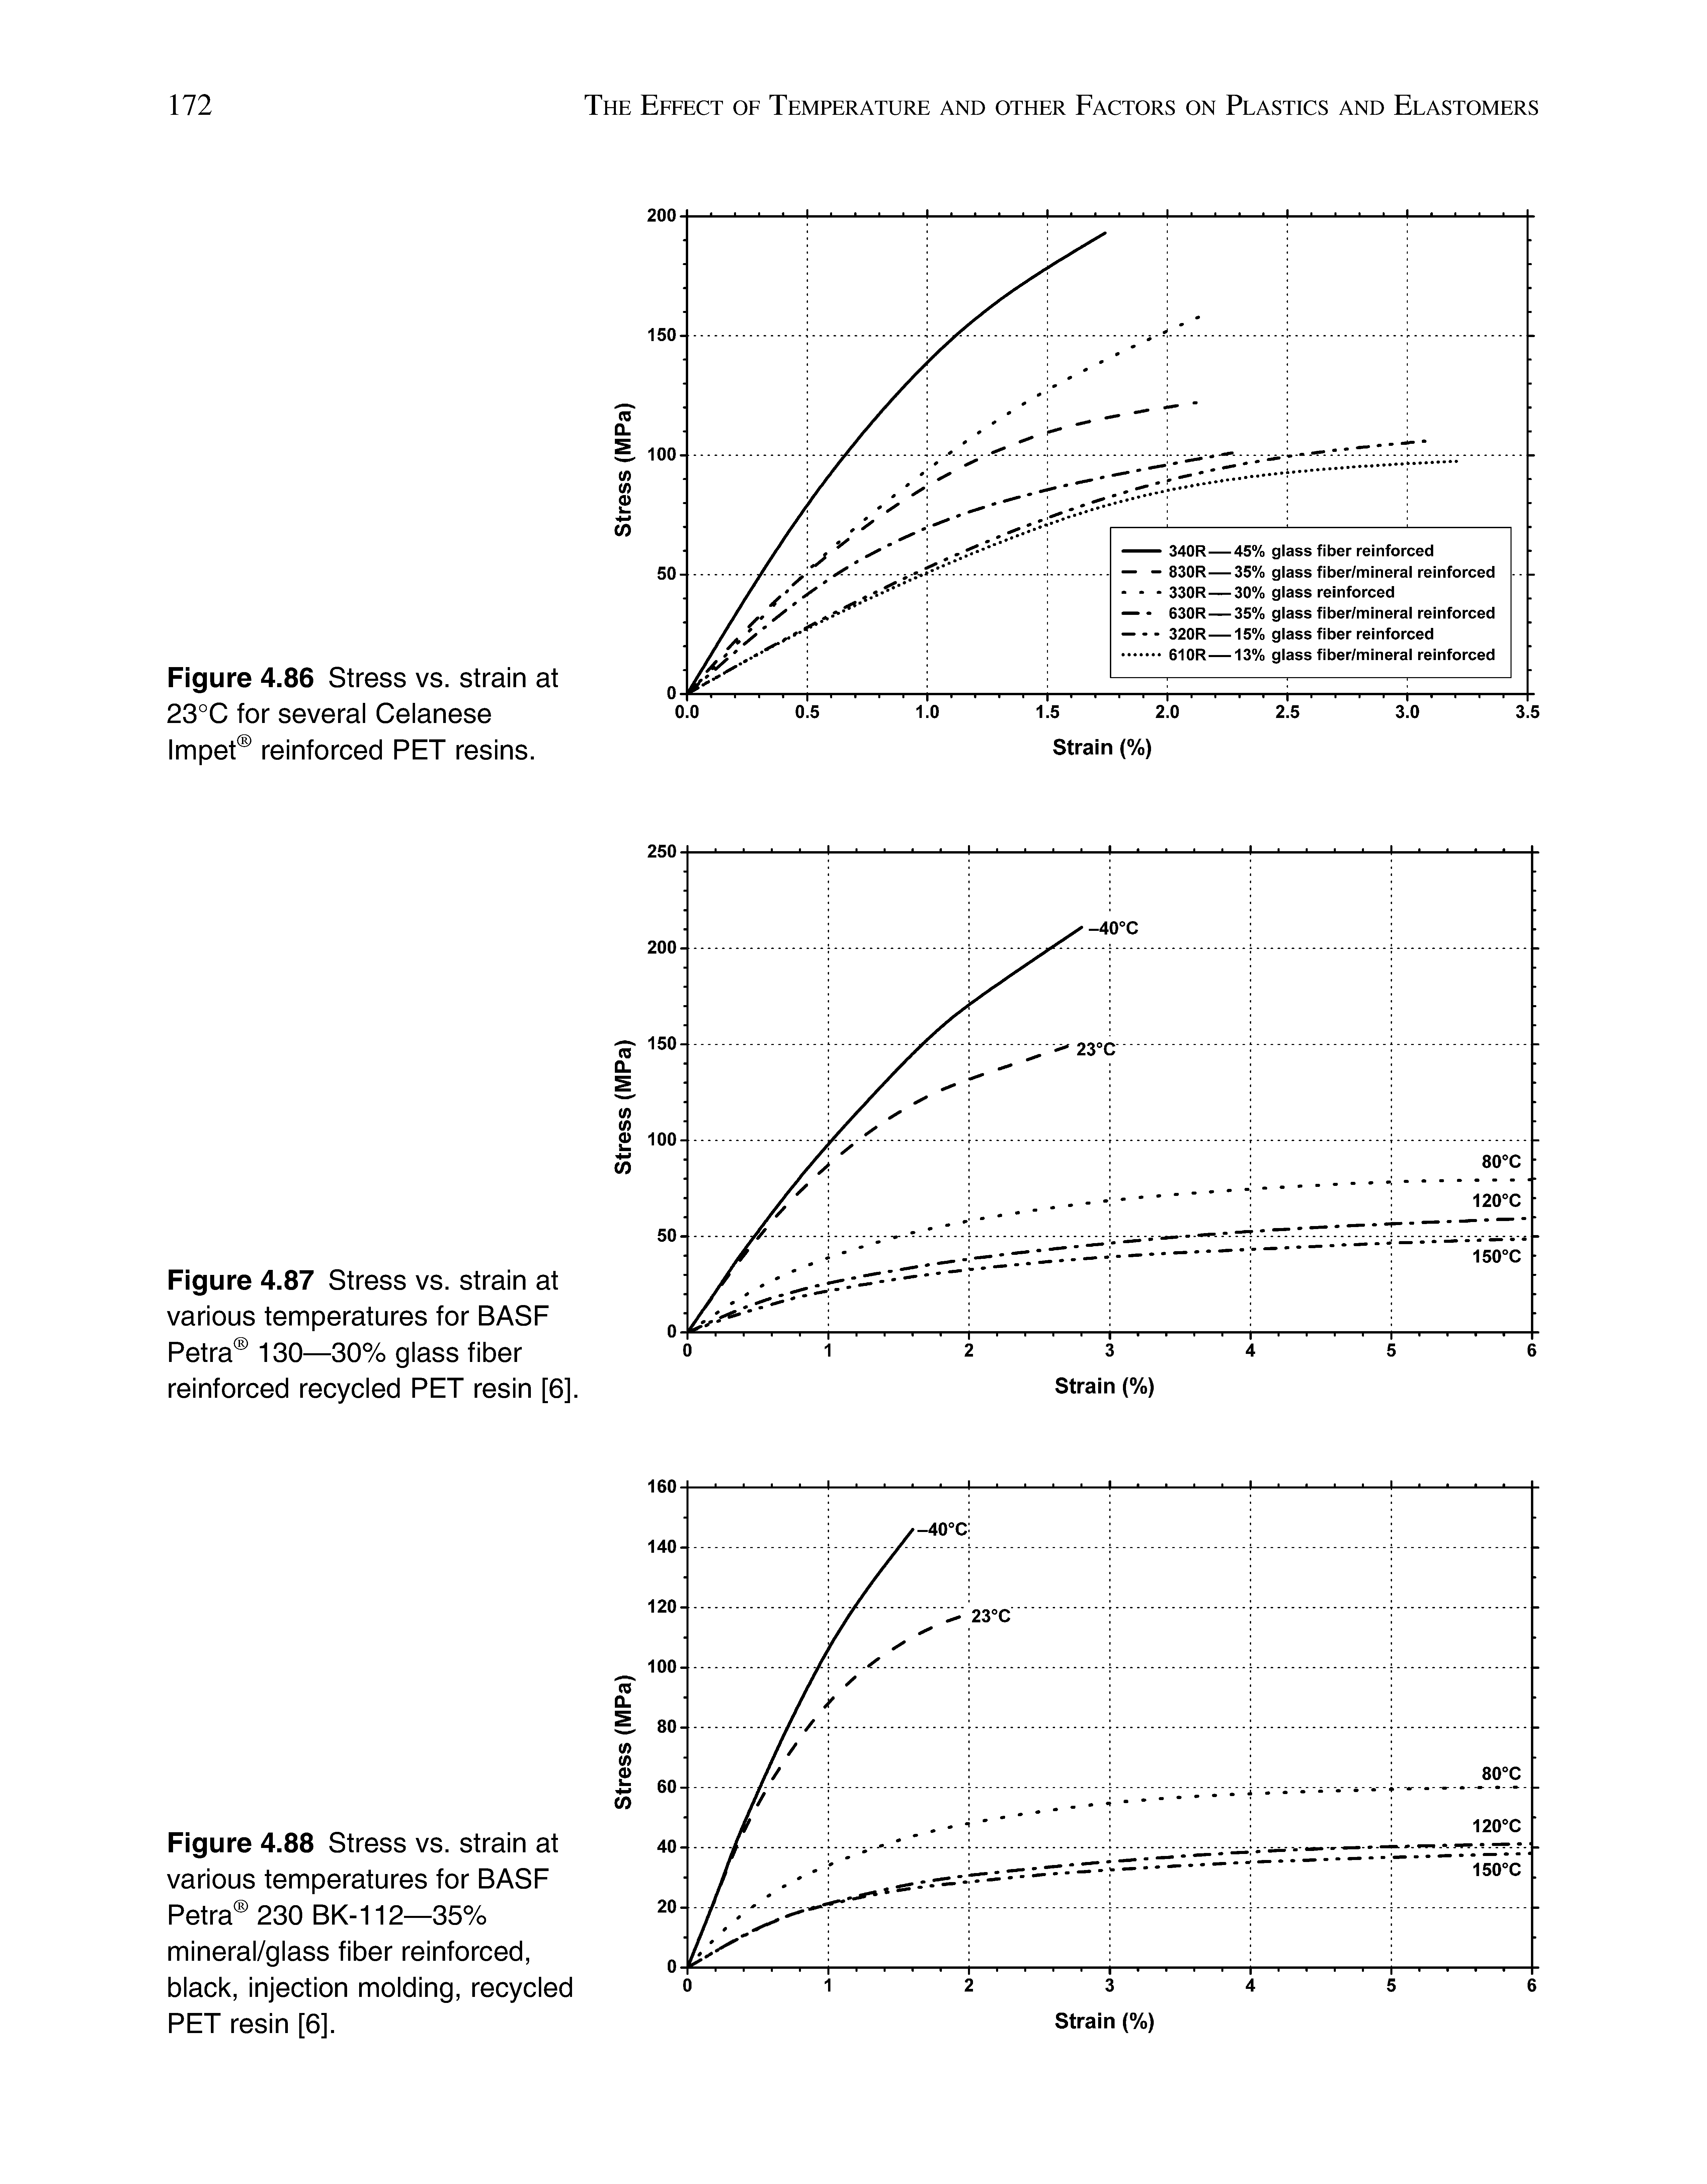 Figure 4.88 Stress vs. strain at various temperatures for BASF Petra 230 BK-112—35% mineral/glass fiber reinforced, black, injection molding, recycled PET resin [6].